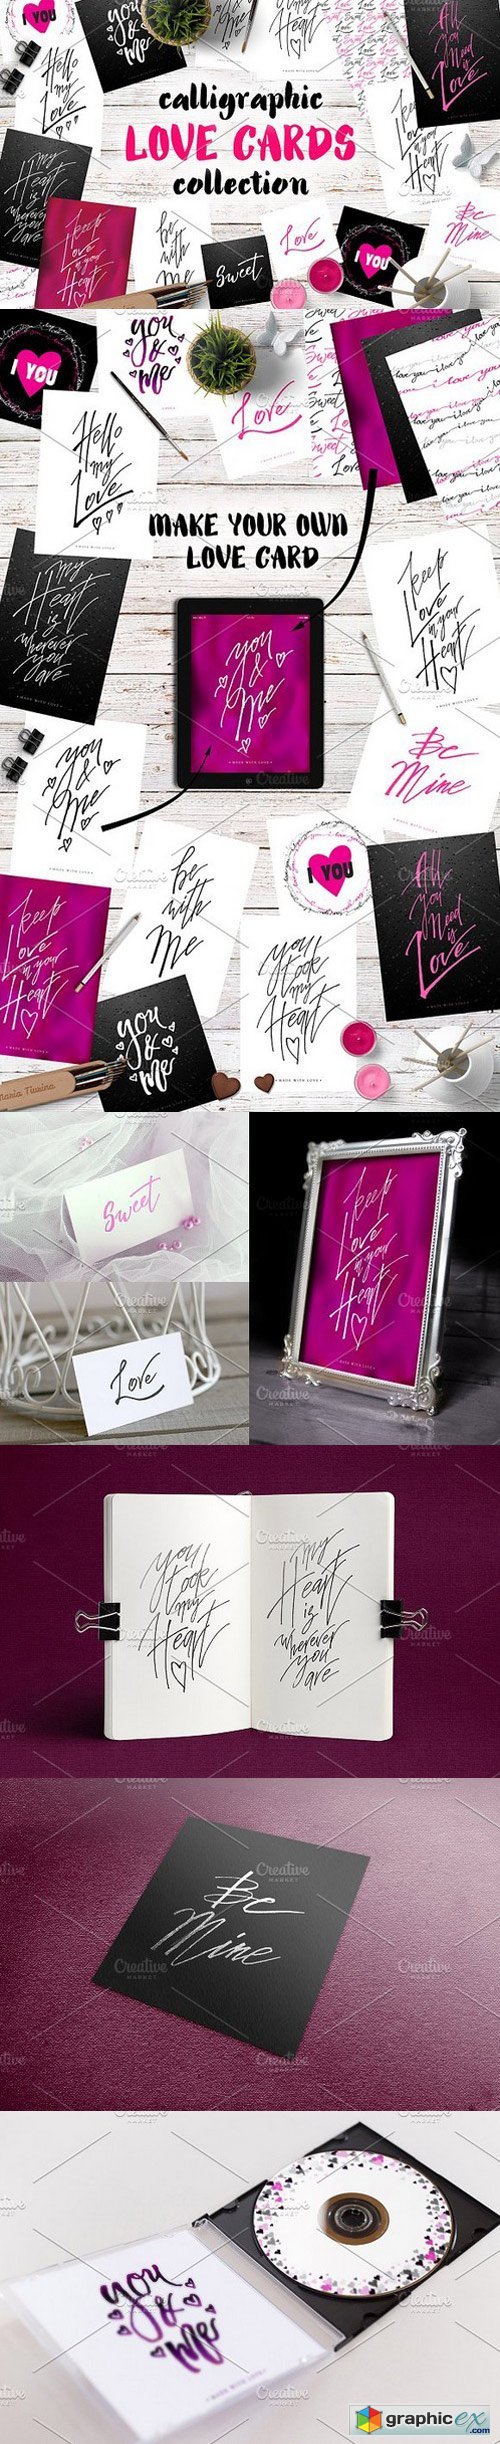 Calligraphy Love Cards